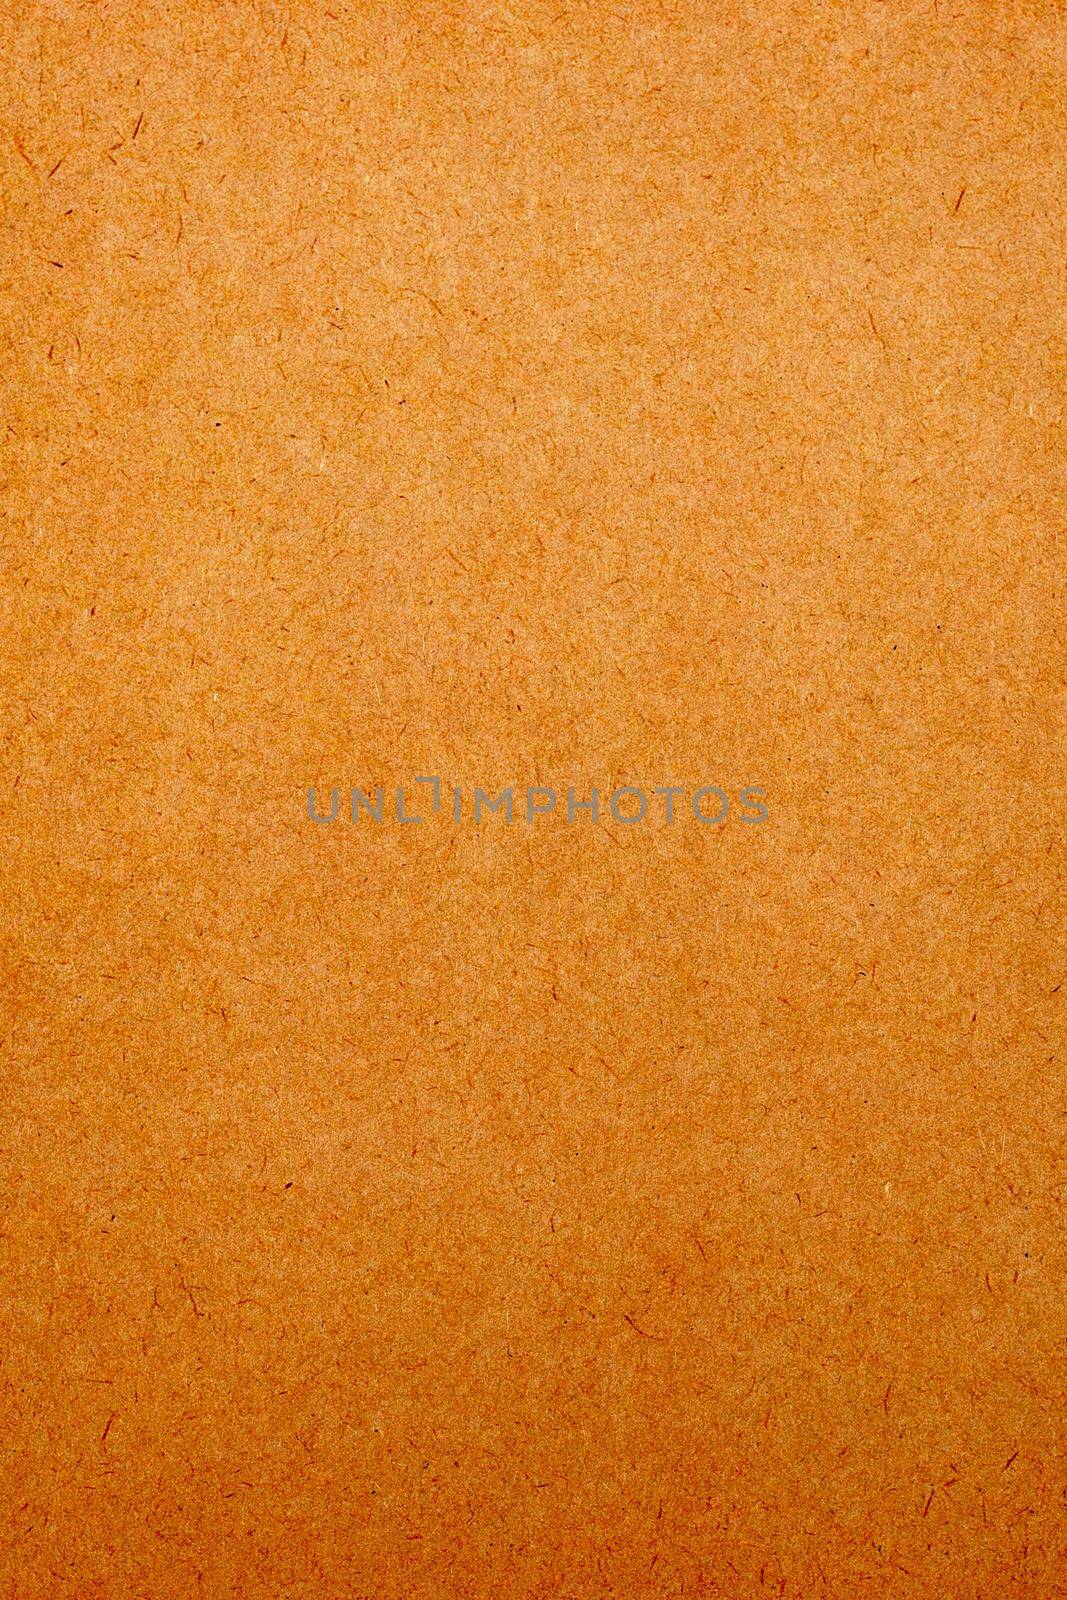 Sheet of brown paper or cardboard texture for background. by Bowonpat